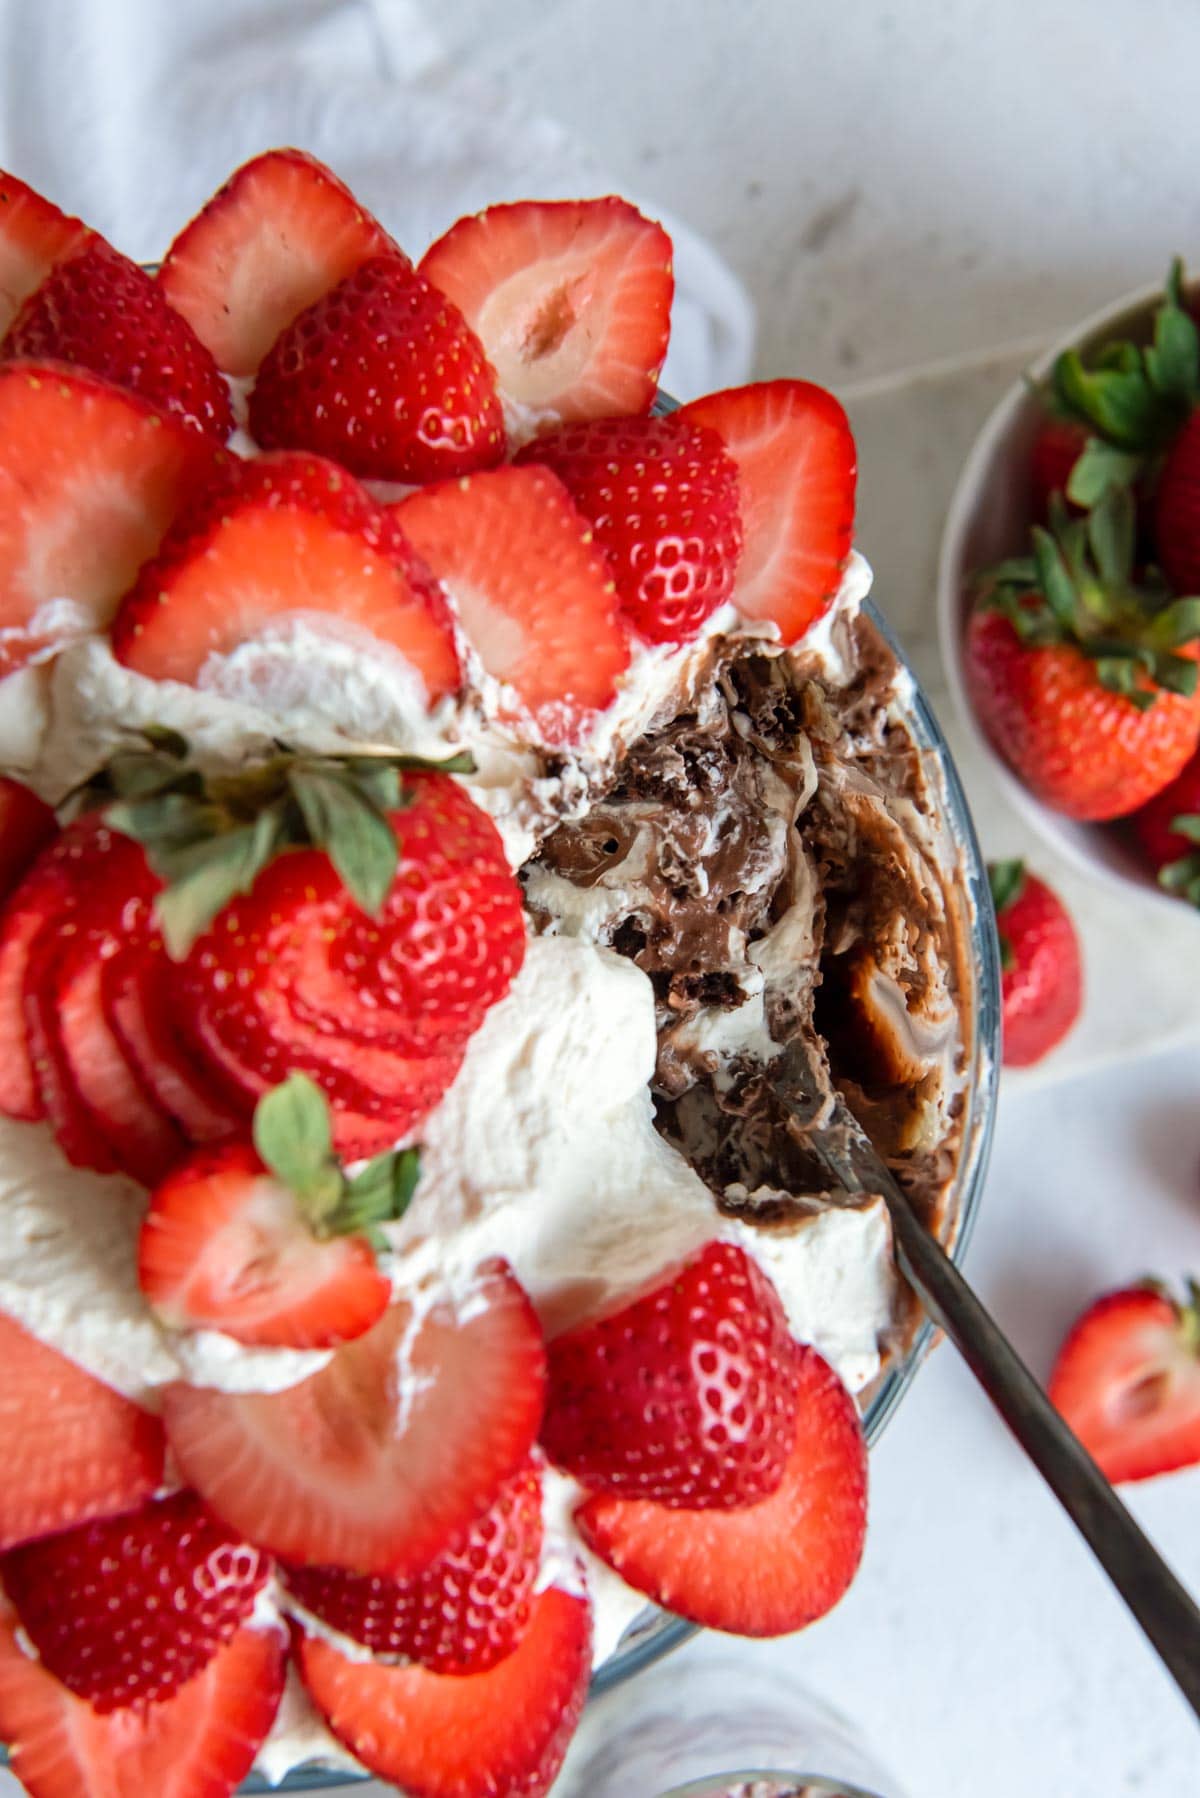 Top down image of a strawberry chocolate punch bowl cake with a scoop taken out of it.